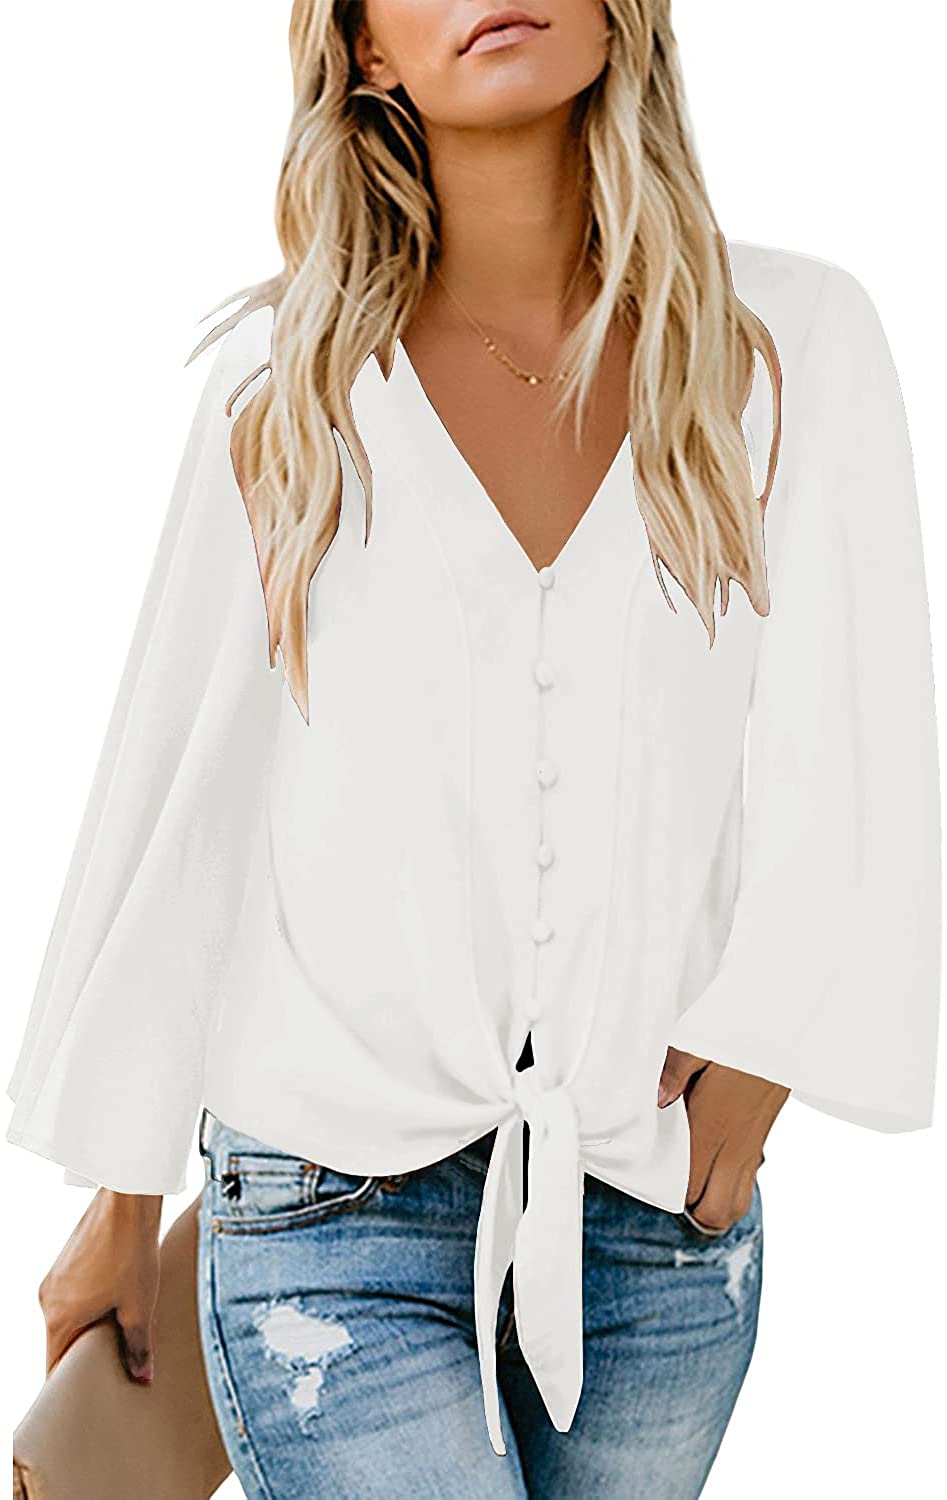 luvamia Womens V Neck Button Down Shirts Casual Long Sleeve Tie Knot Tops Blouses